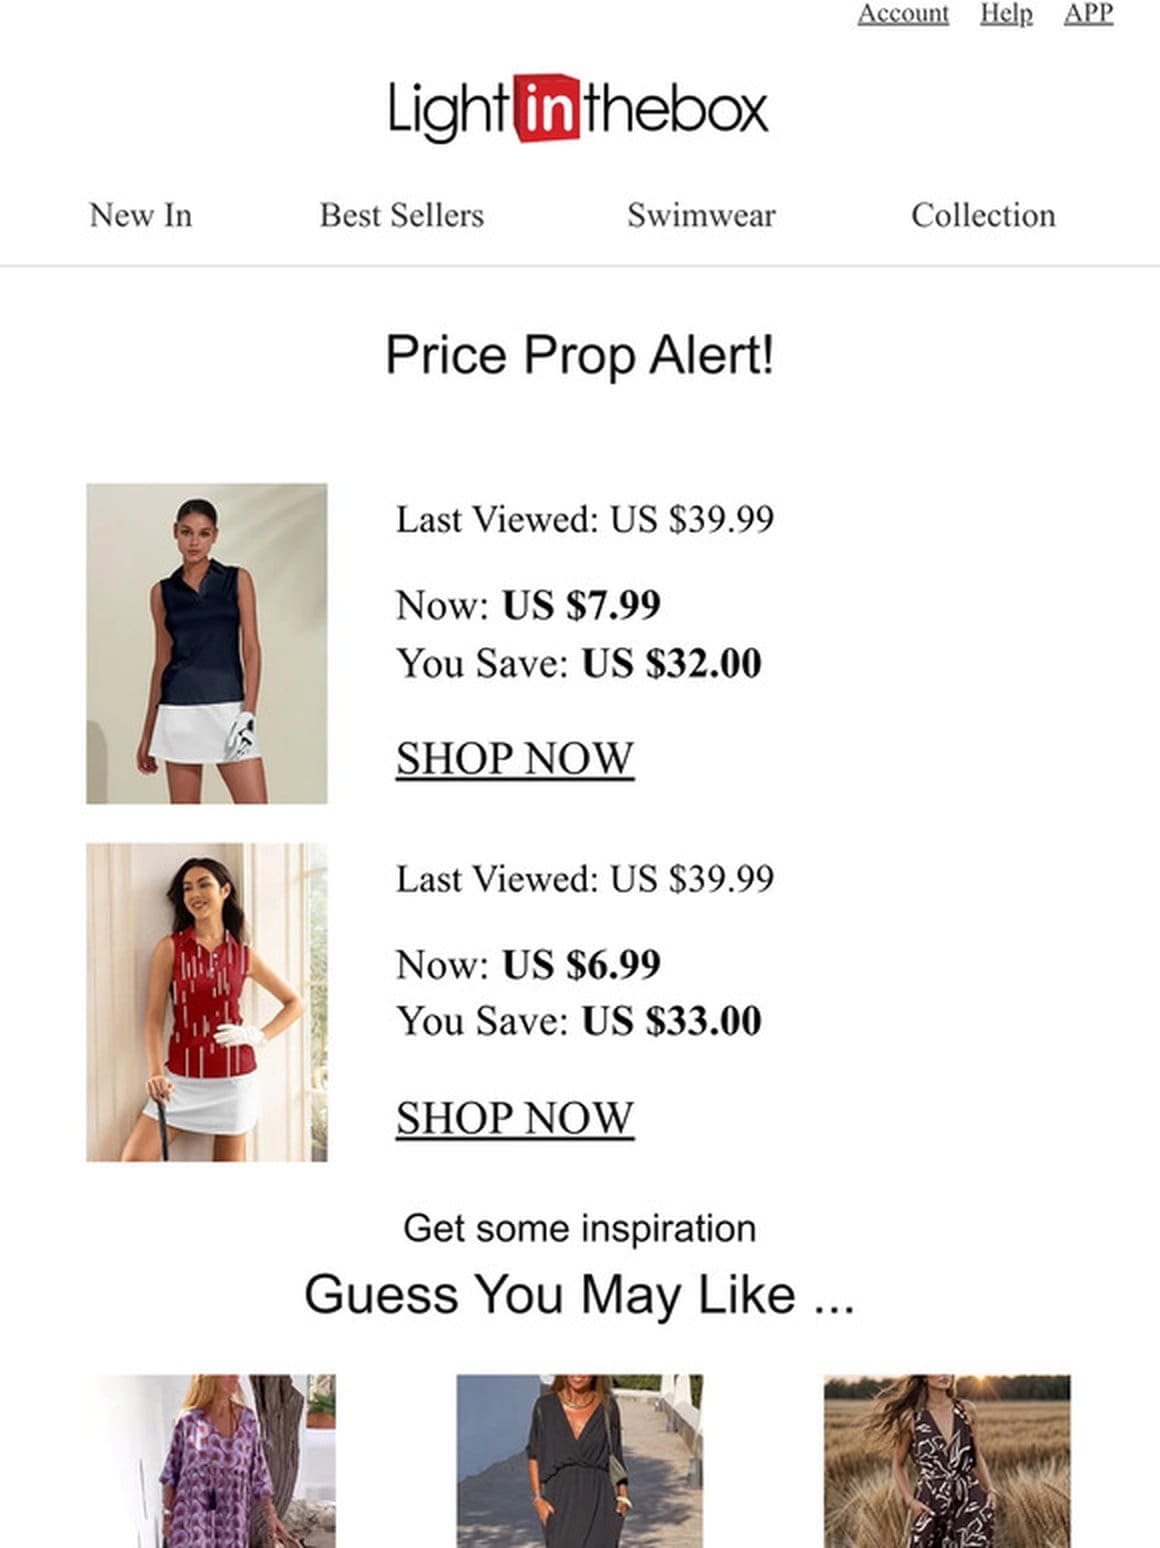 USD $32.00 saved on Women’s Golf Clothing.Shop Now>